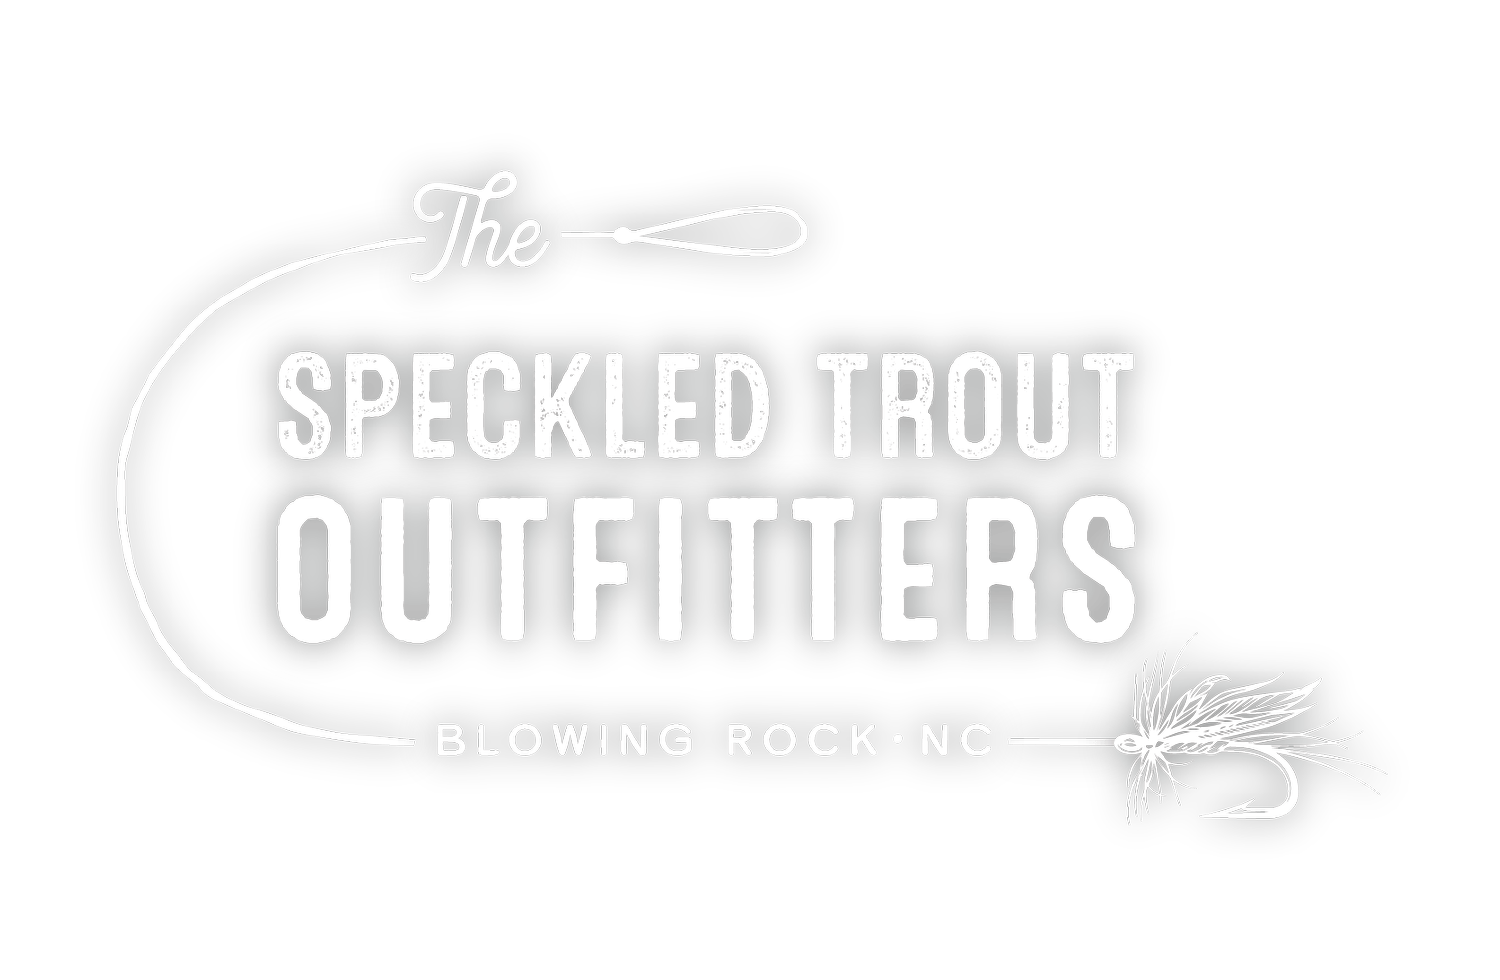 The Specked Trout Outfitters